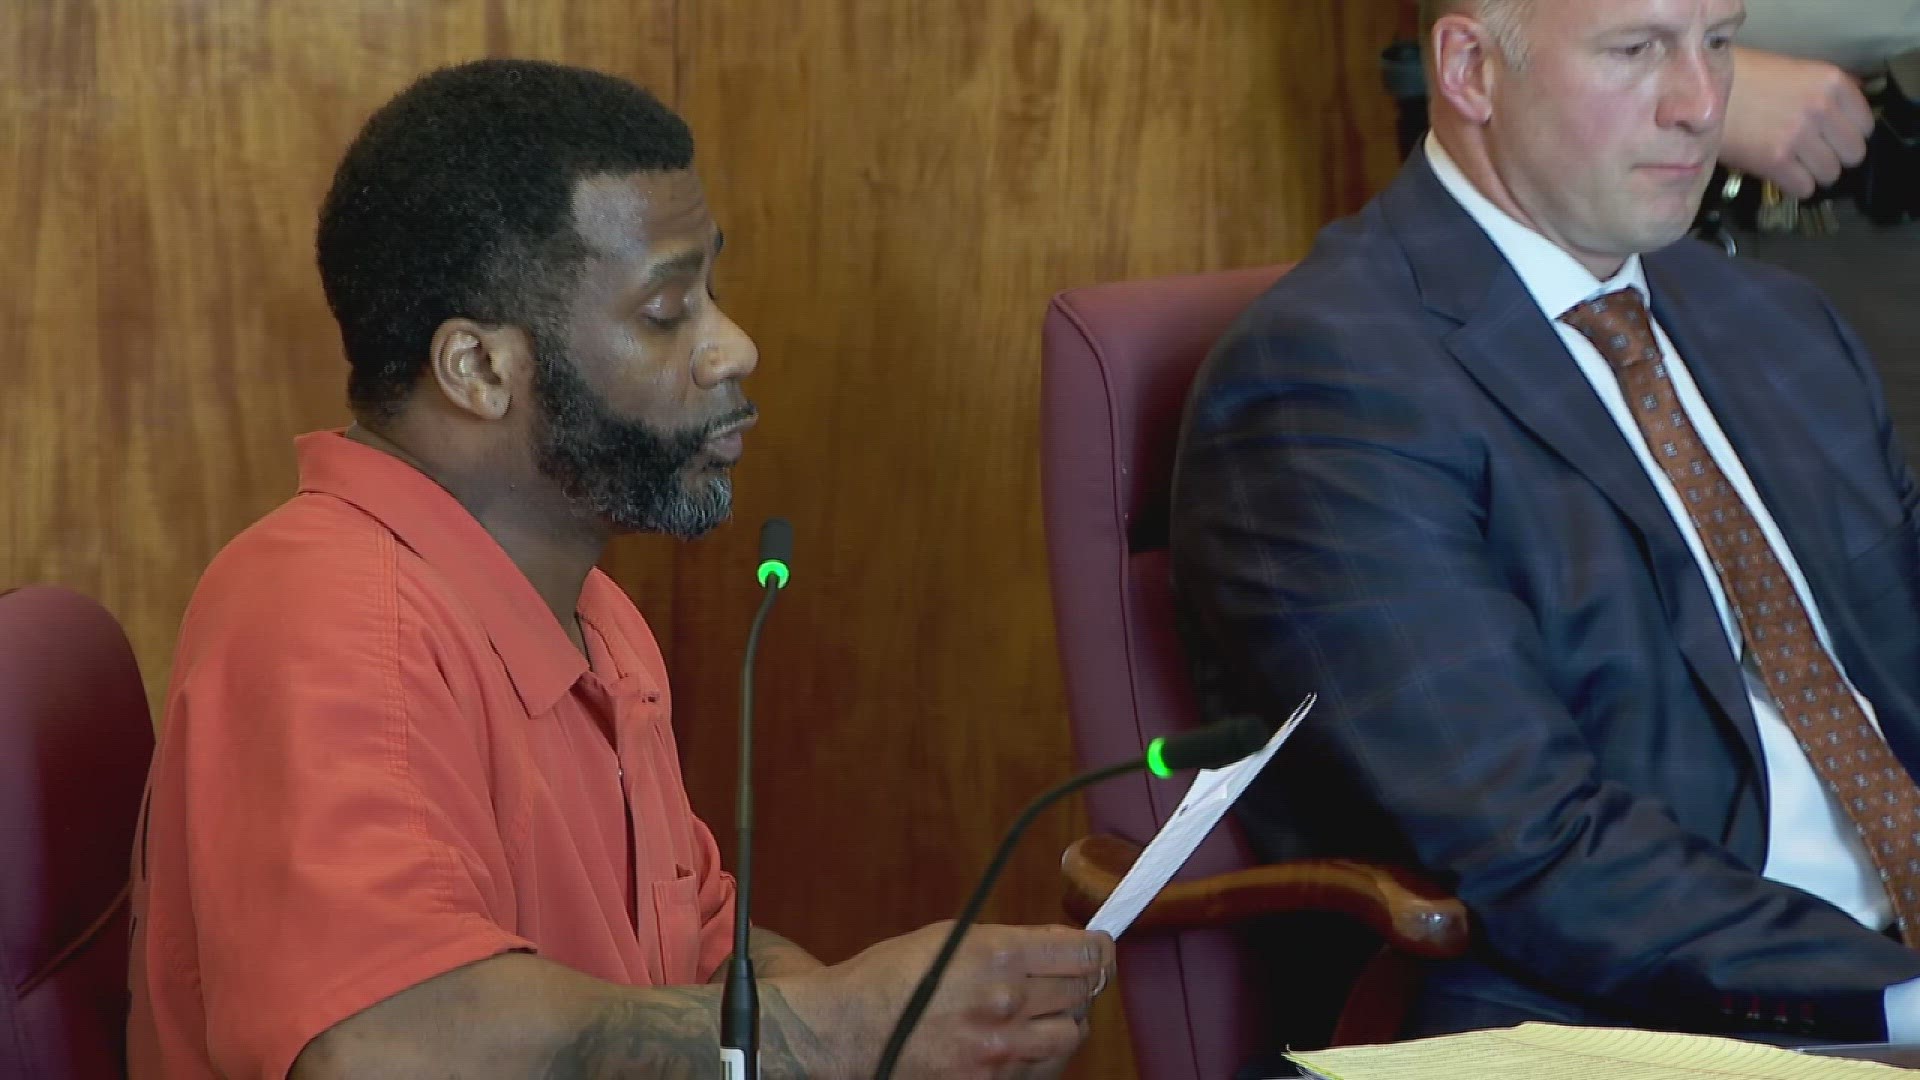 Judge JaPaul J. Harris told defendant Antoine Suggs he couldn't reconcile a man described as a family man and devoted father with someone who killed four people.